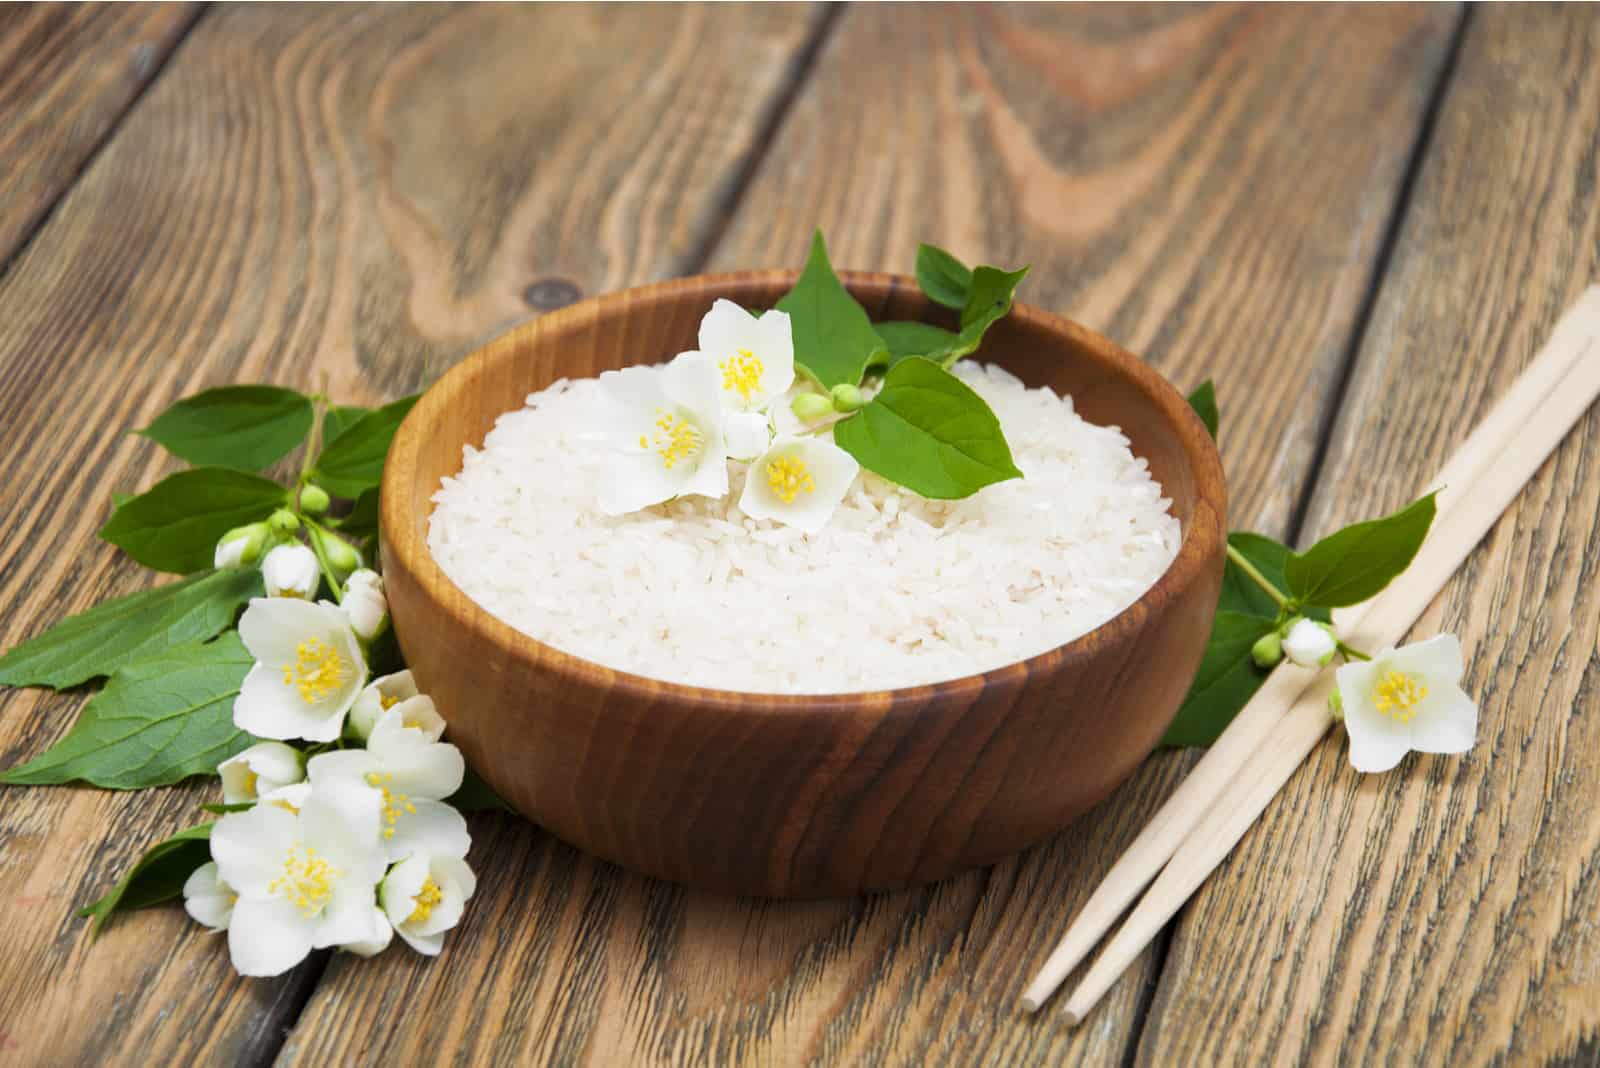 Can Dogs Eat Jasmine Rice? The Effect Of This Food On Puppies